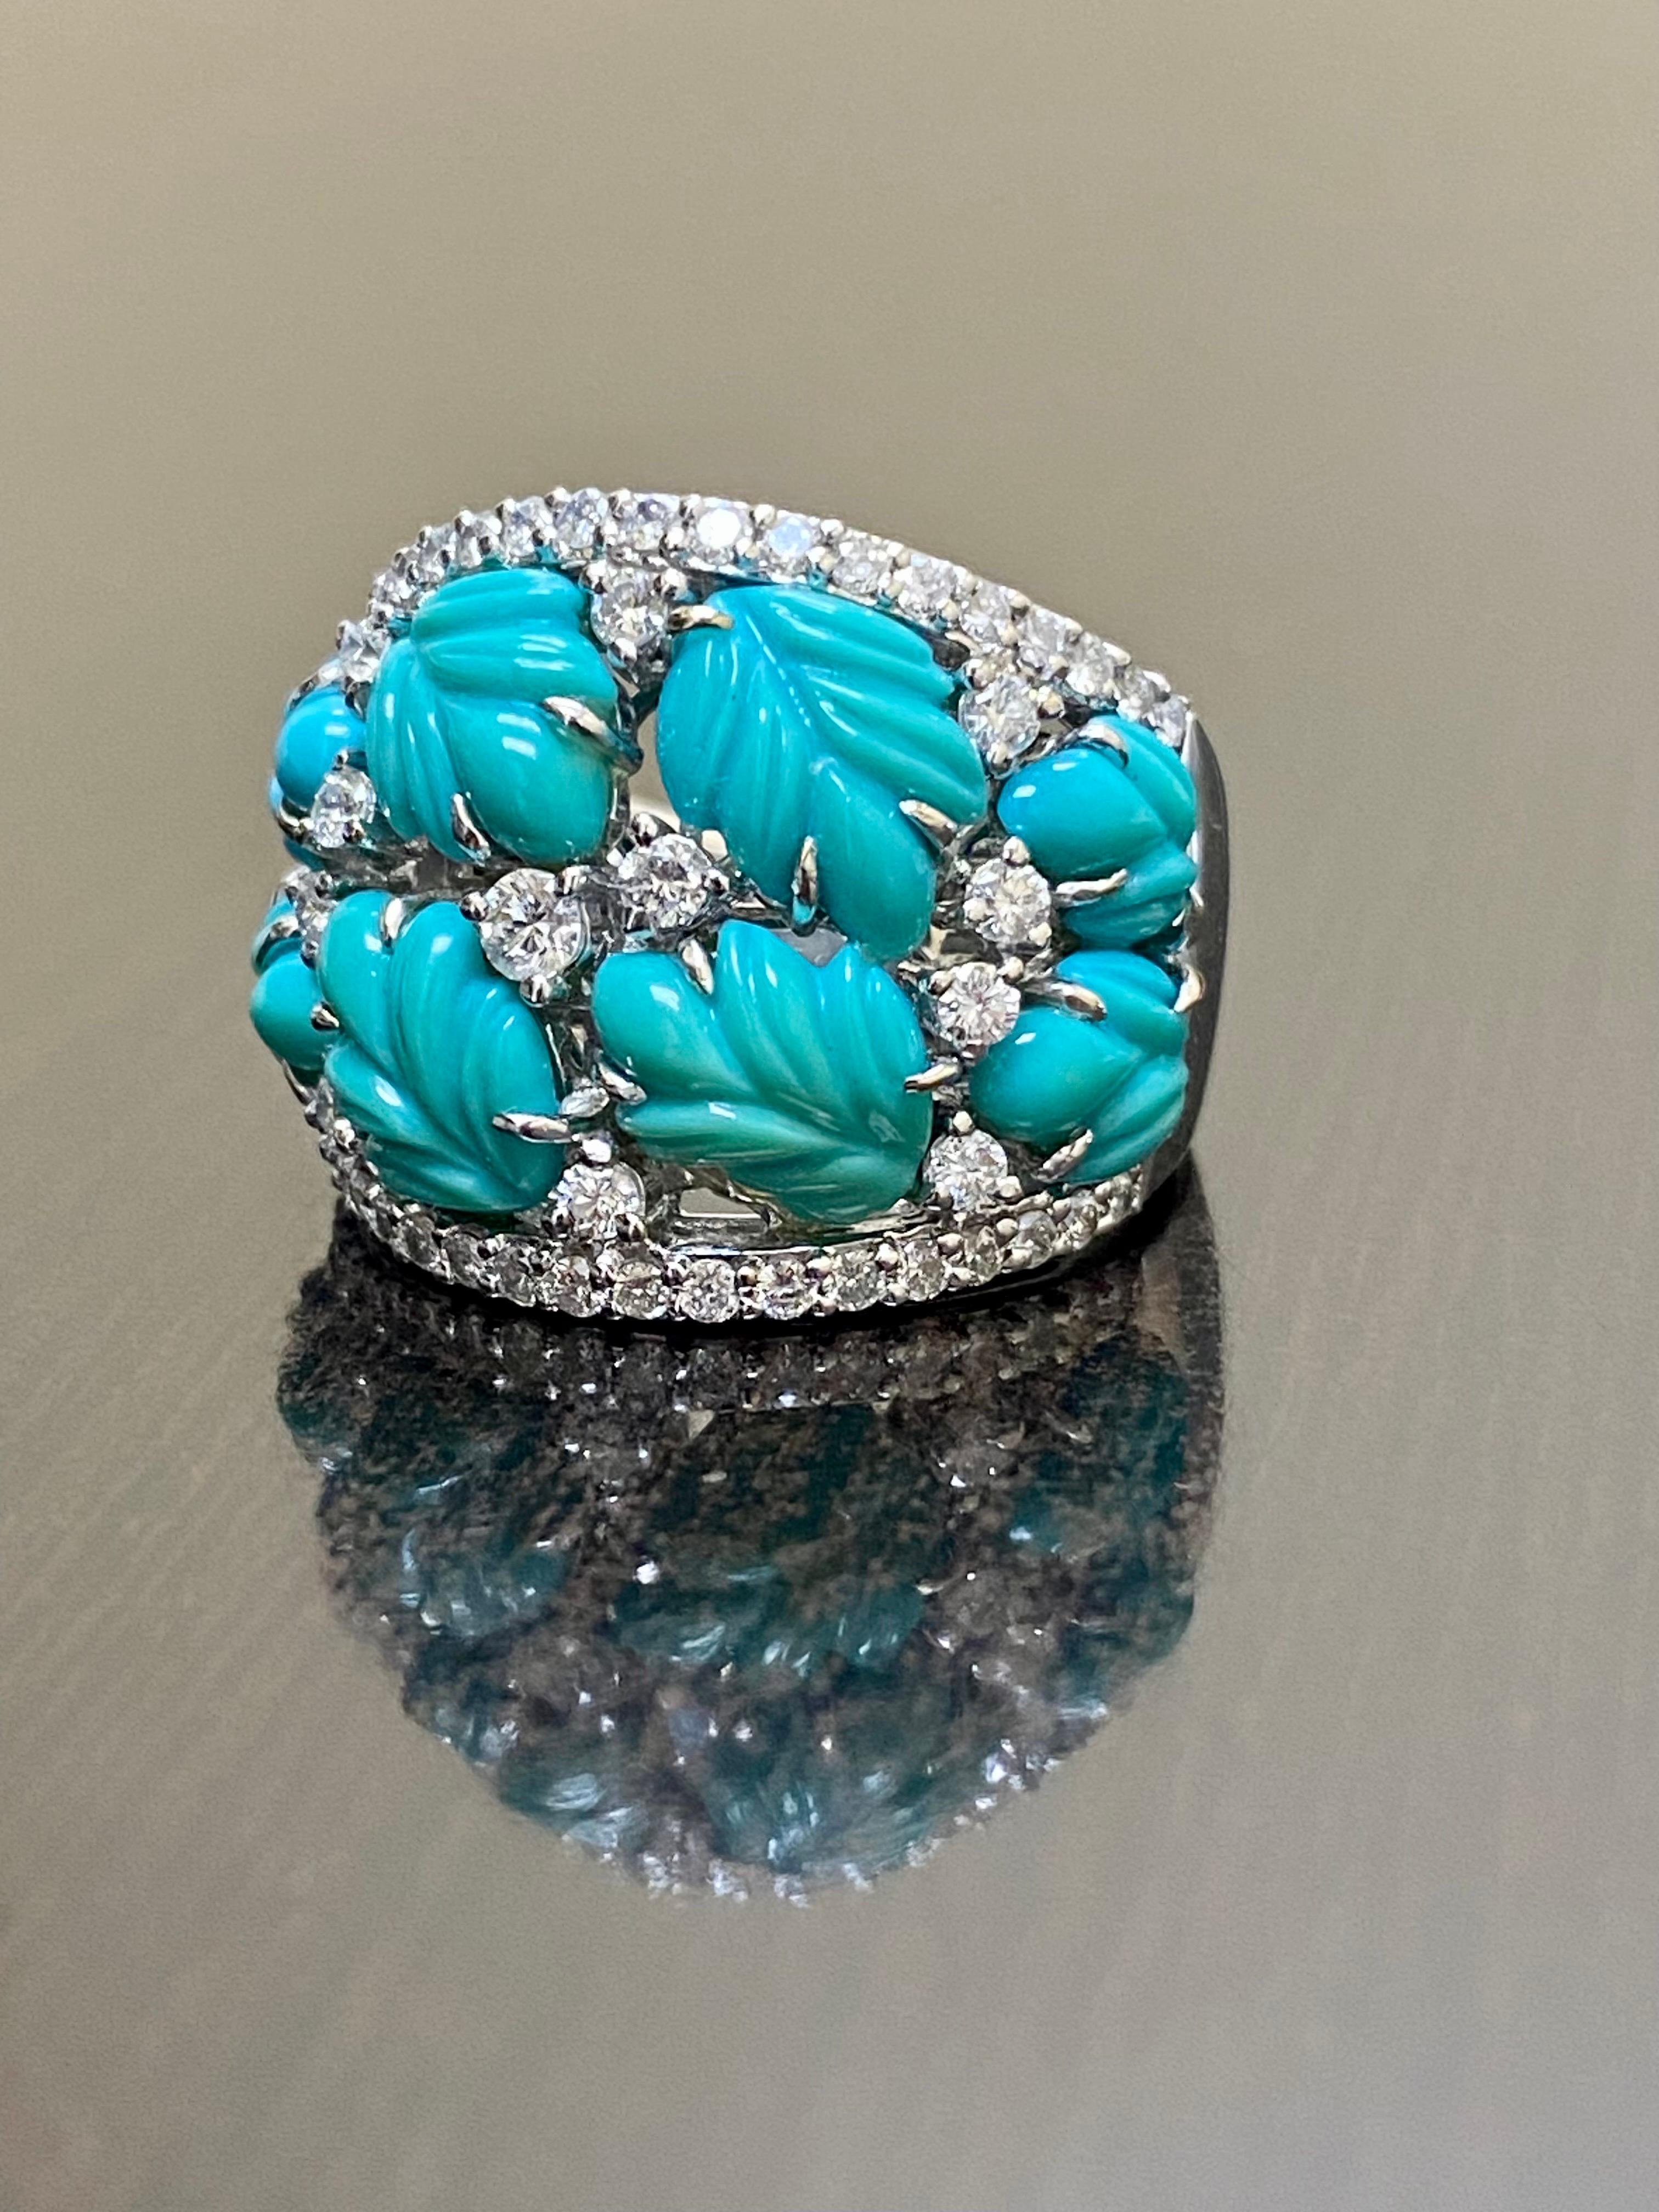 Art Deco One of a Kind Handmade 18K White Gold Carved Turquoise Diamond Cocktail Ring For Sale